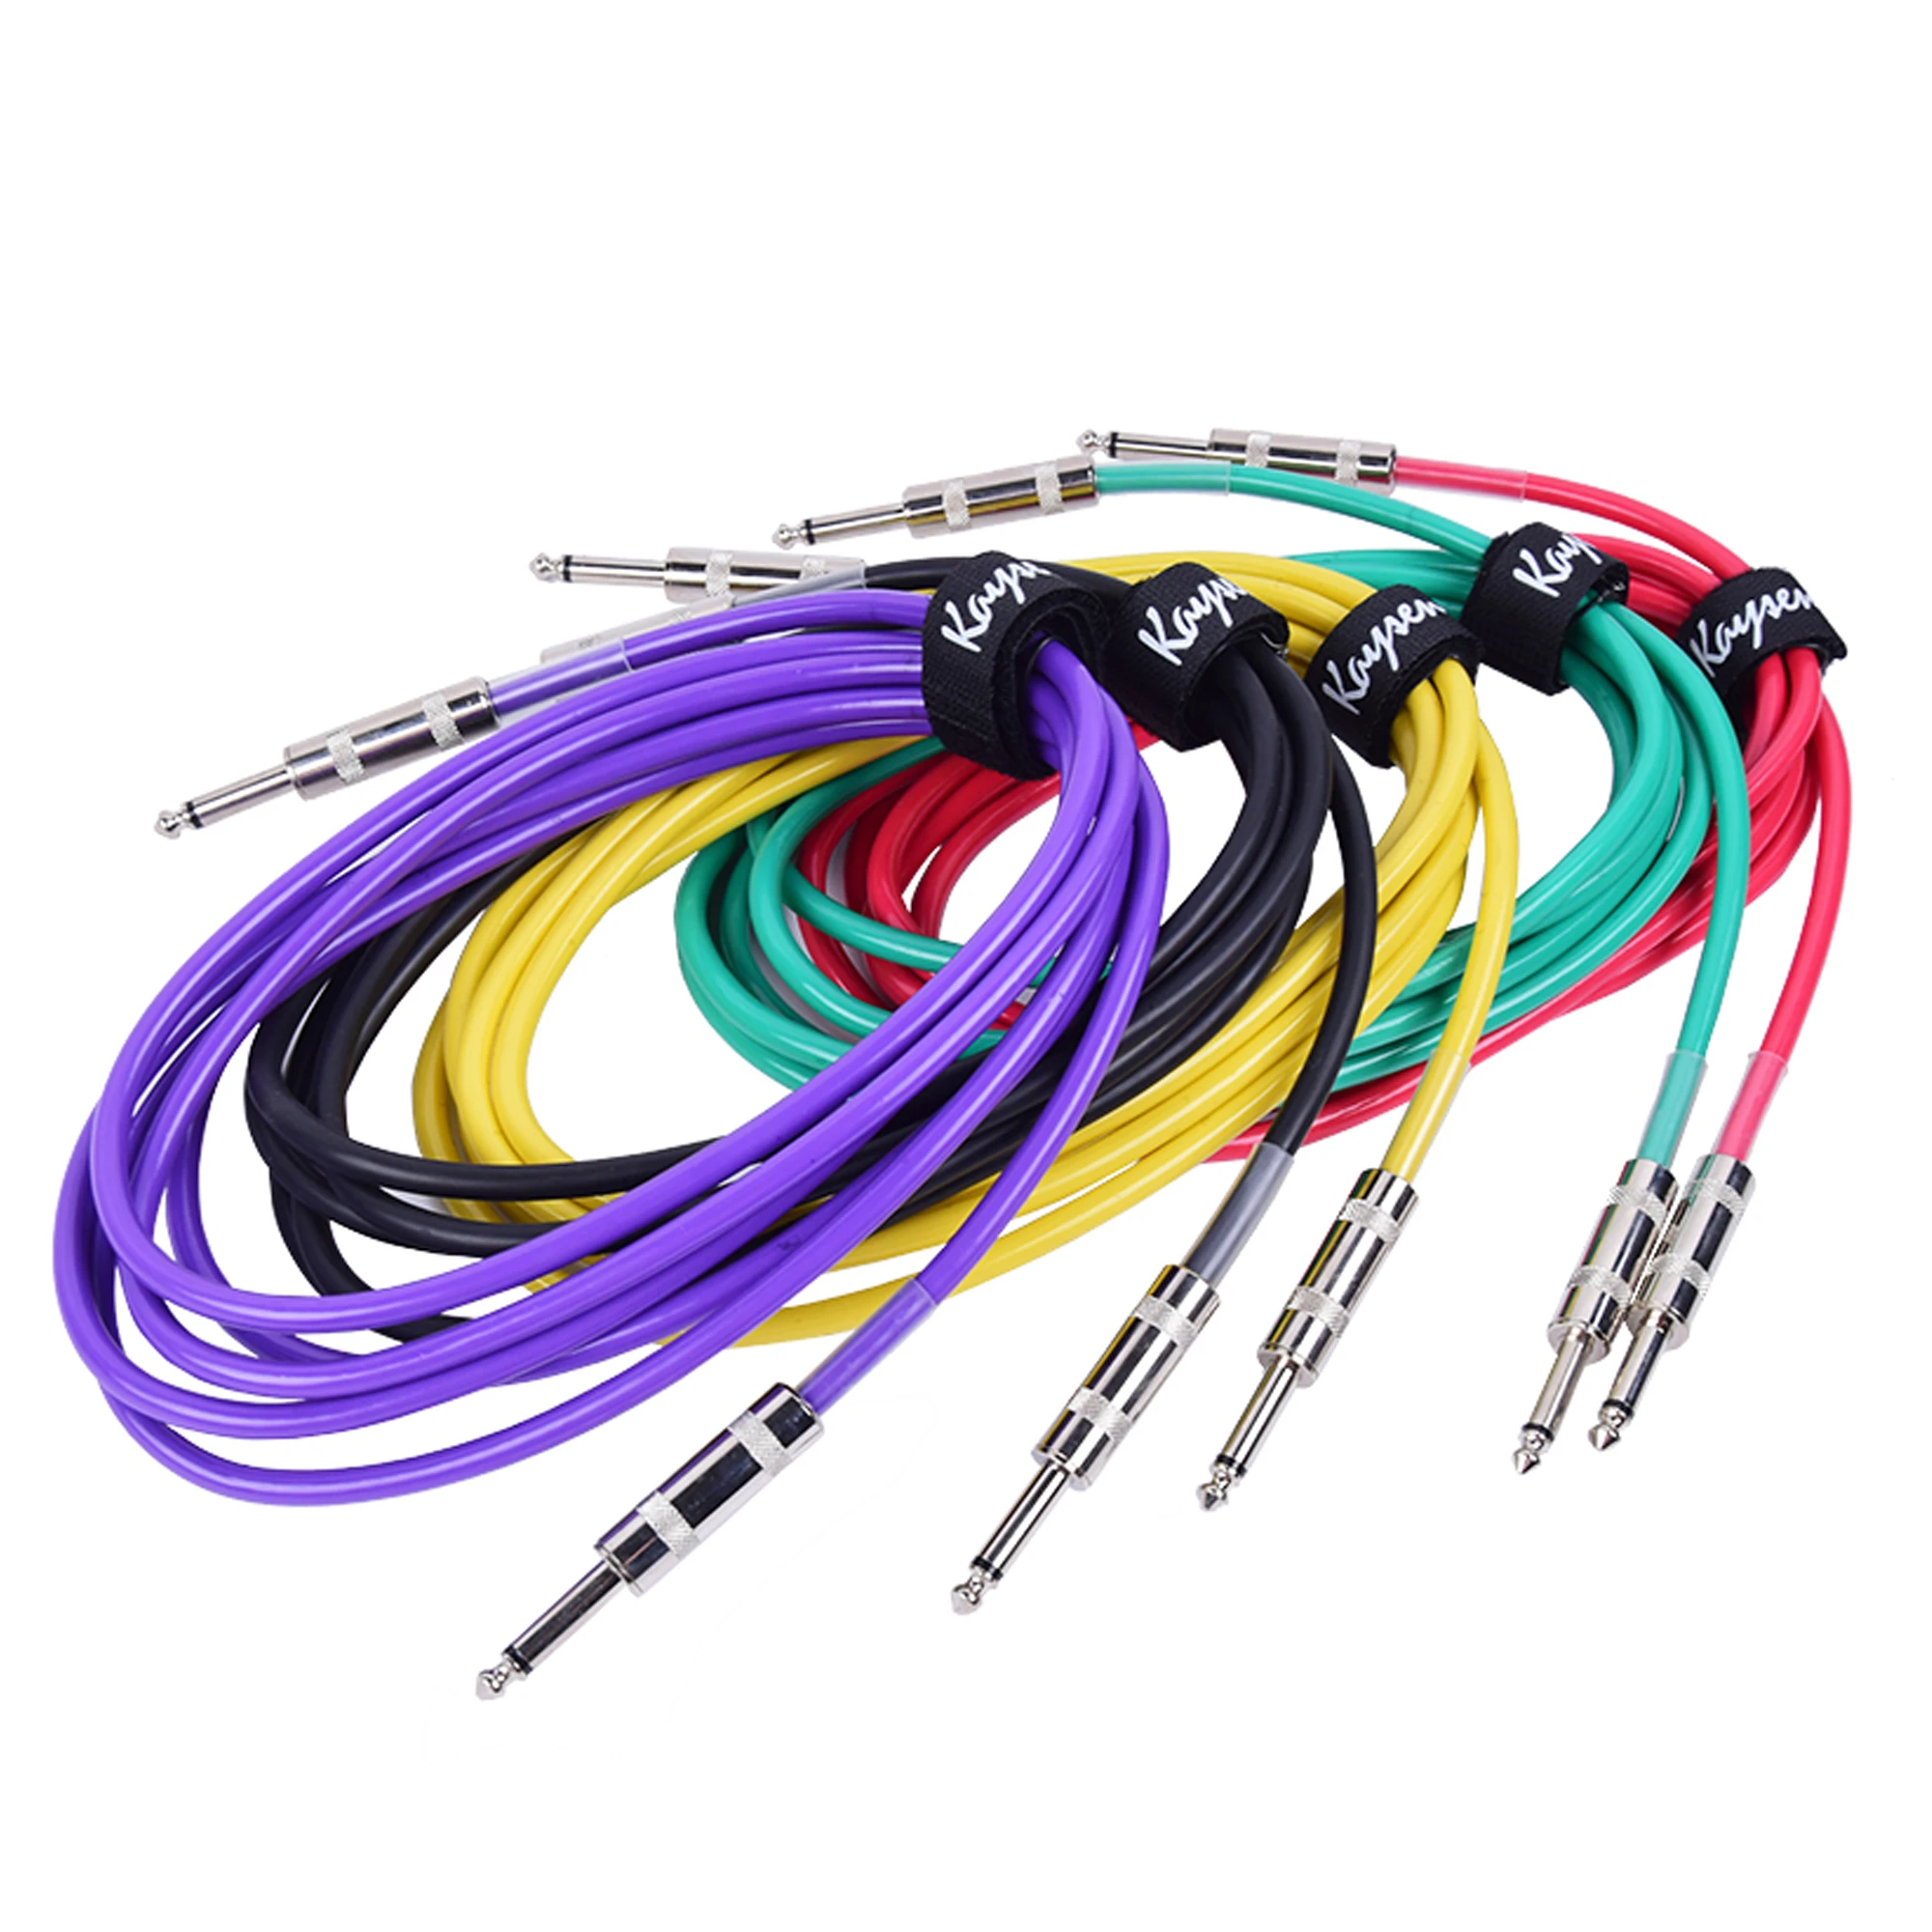 Hot sell musical instruments guitar cable 10m